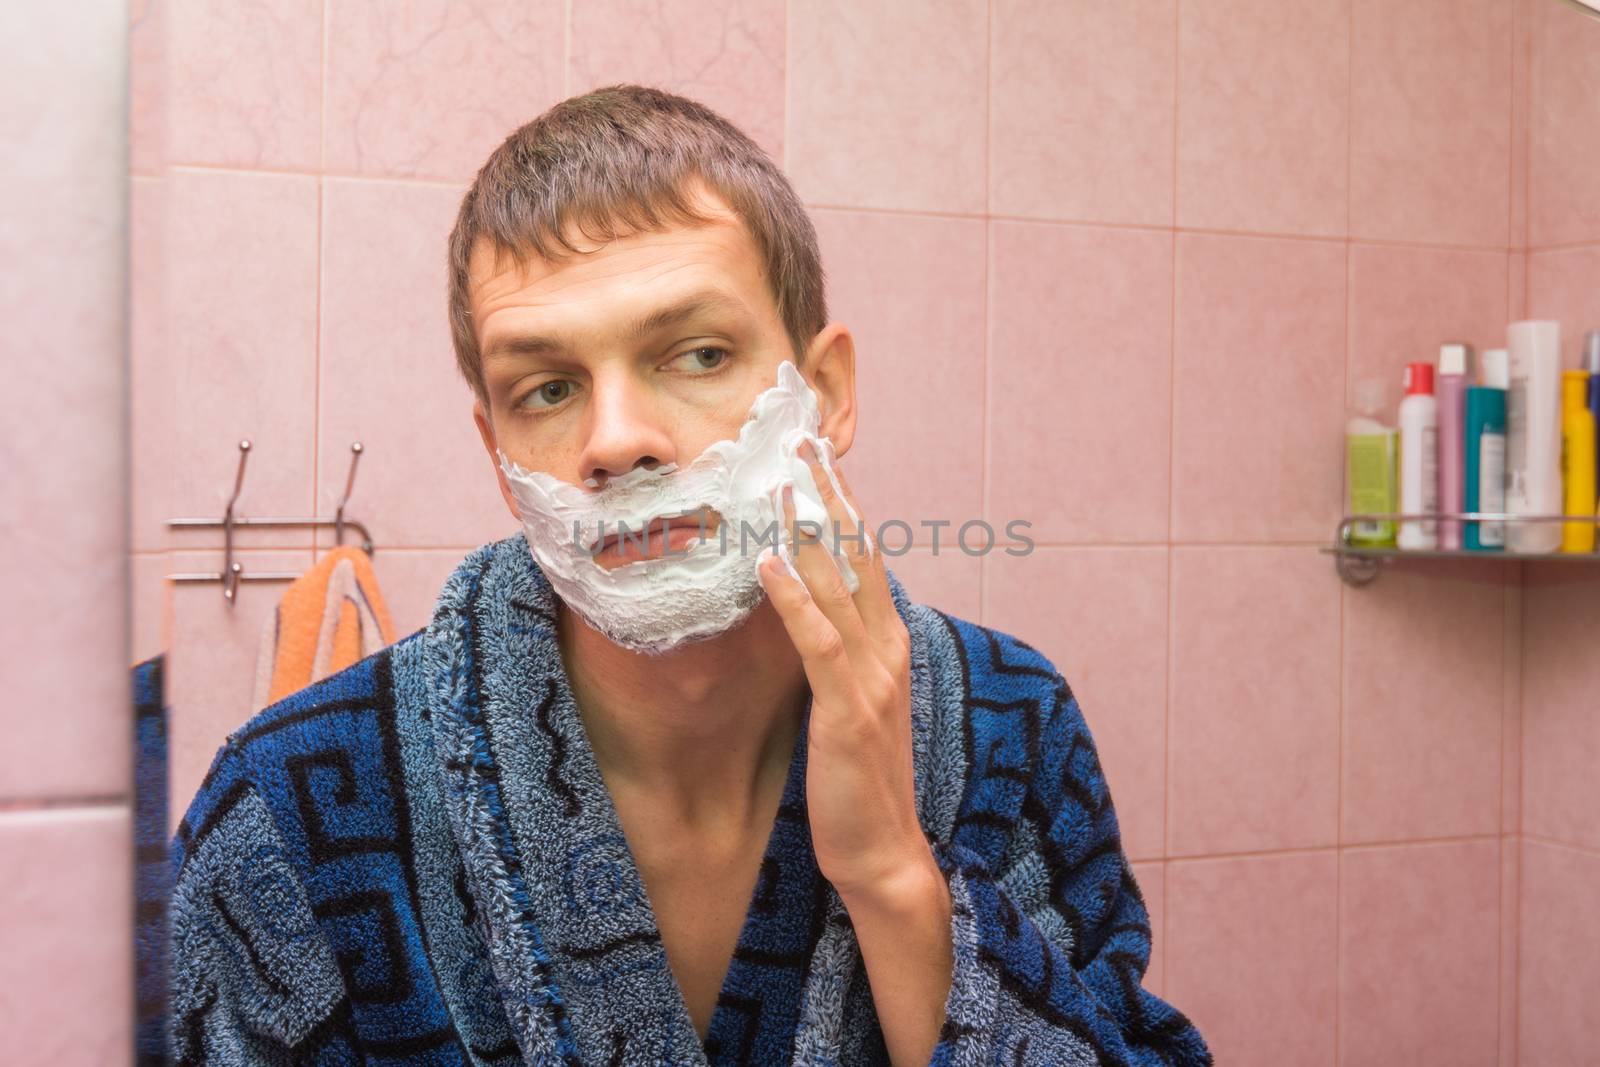 The young man gets shaving foam on face